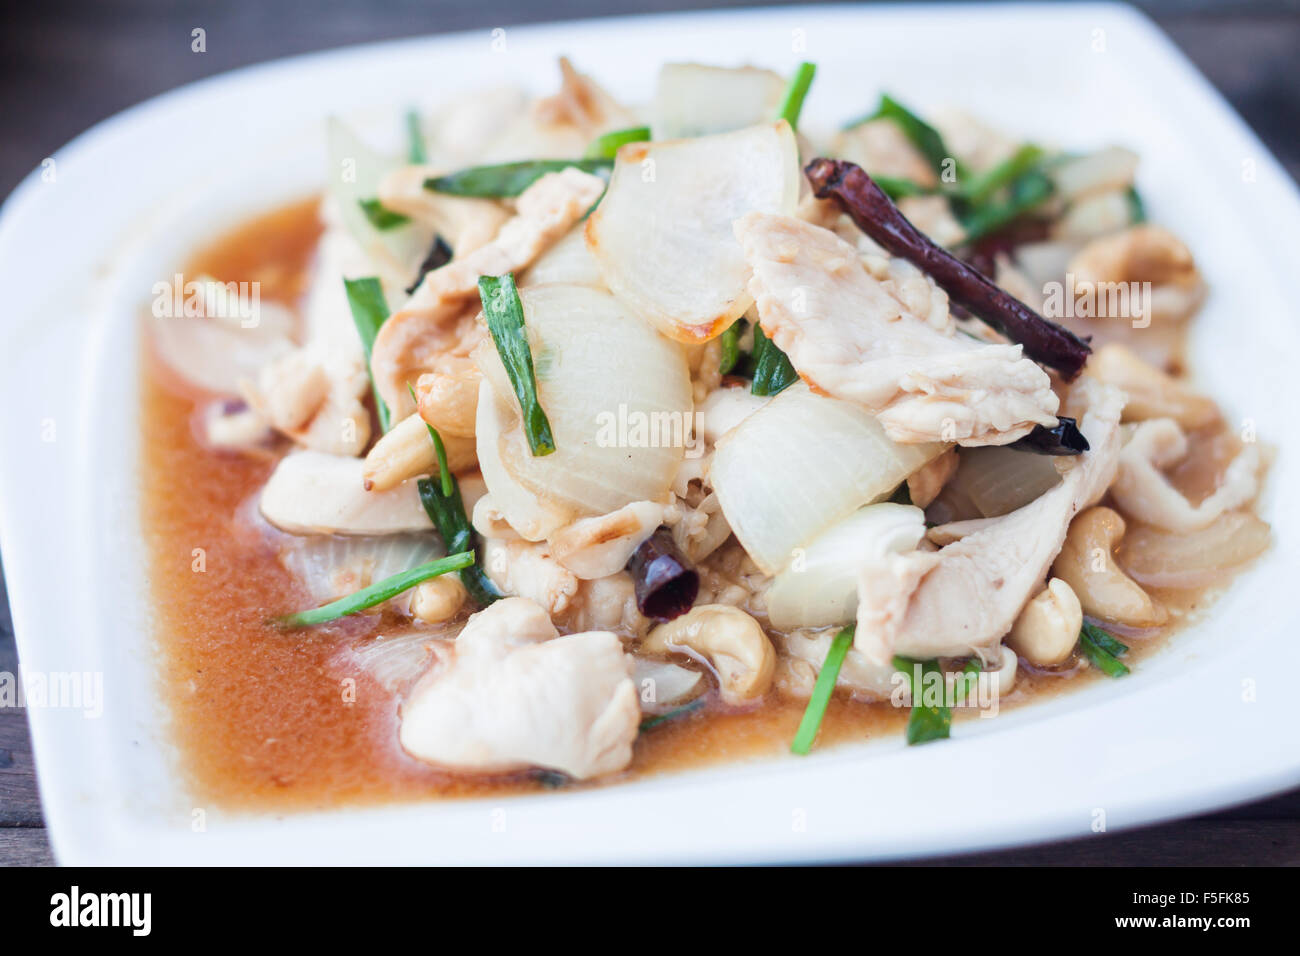 Spicy chicken with cashew nuts, stock photo Stock Photo